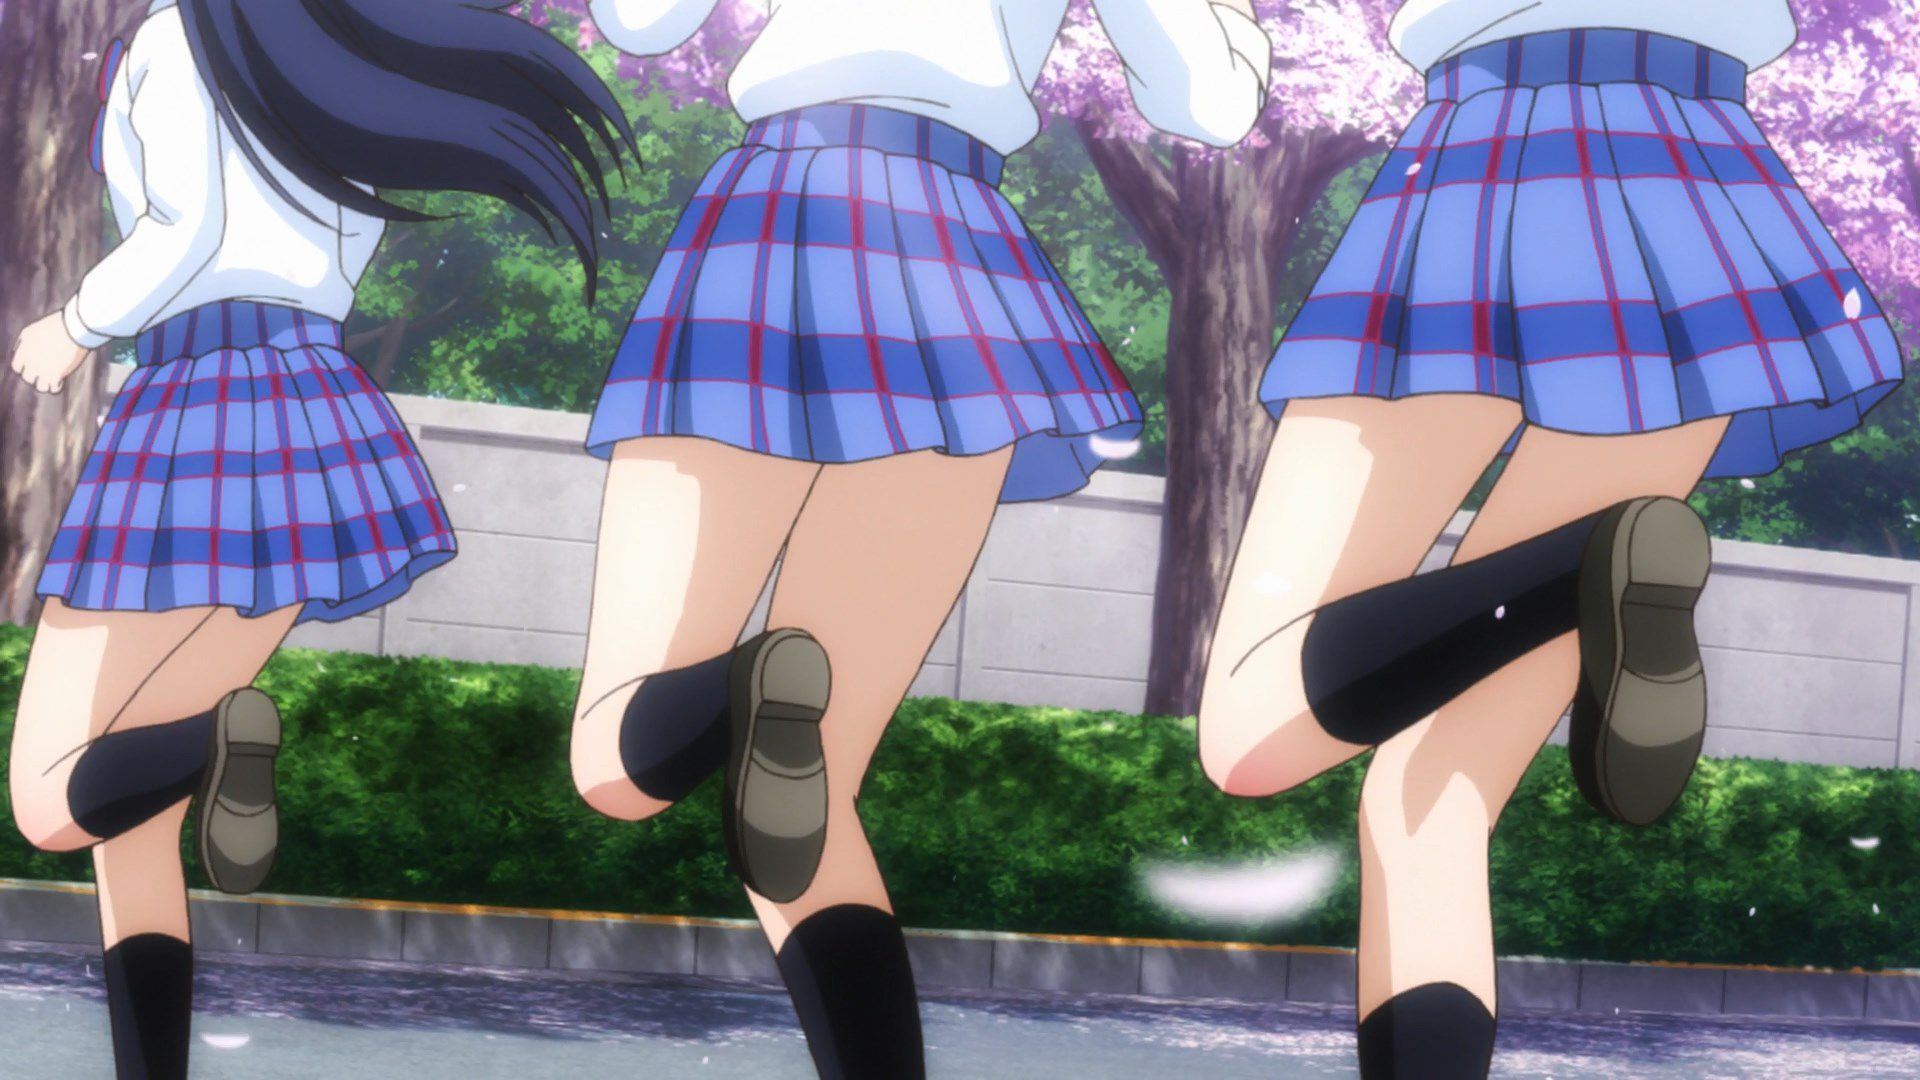 [God images] "love live! ' Μm ' PV's leg is too erotic everyone wakes up to a leg fetish of wwwww 33